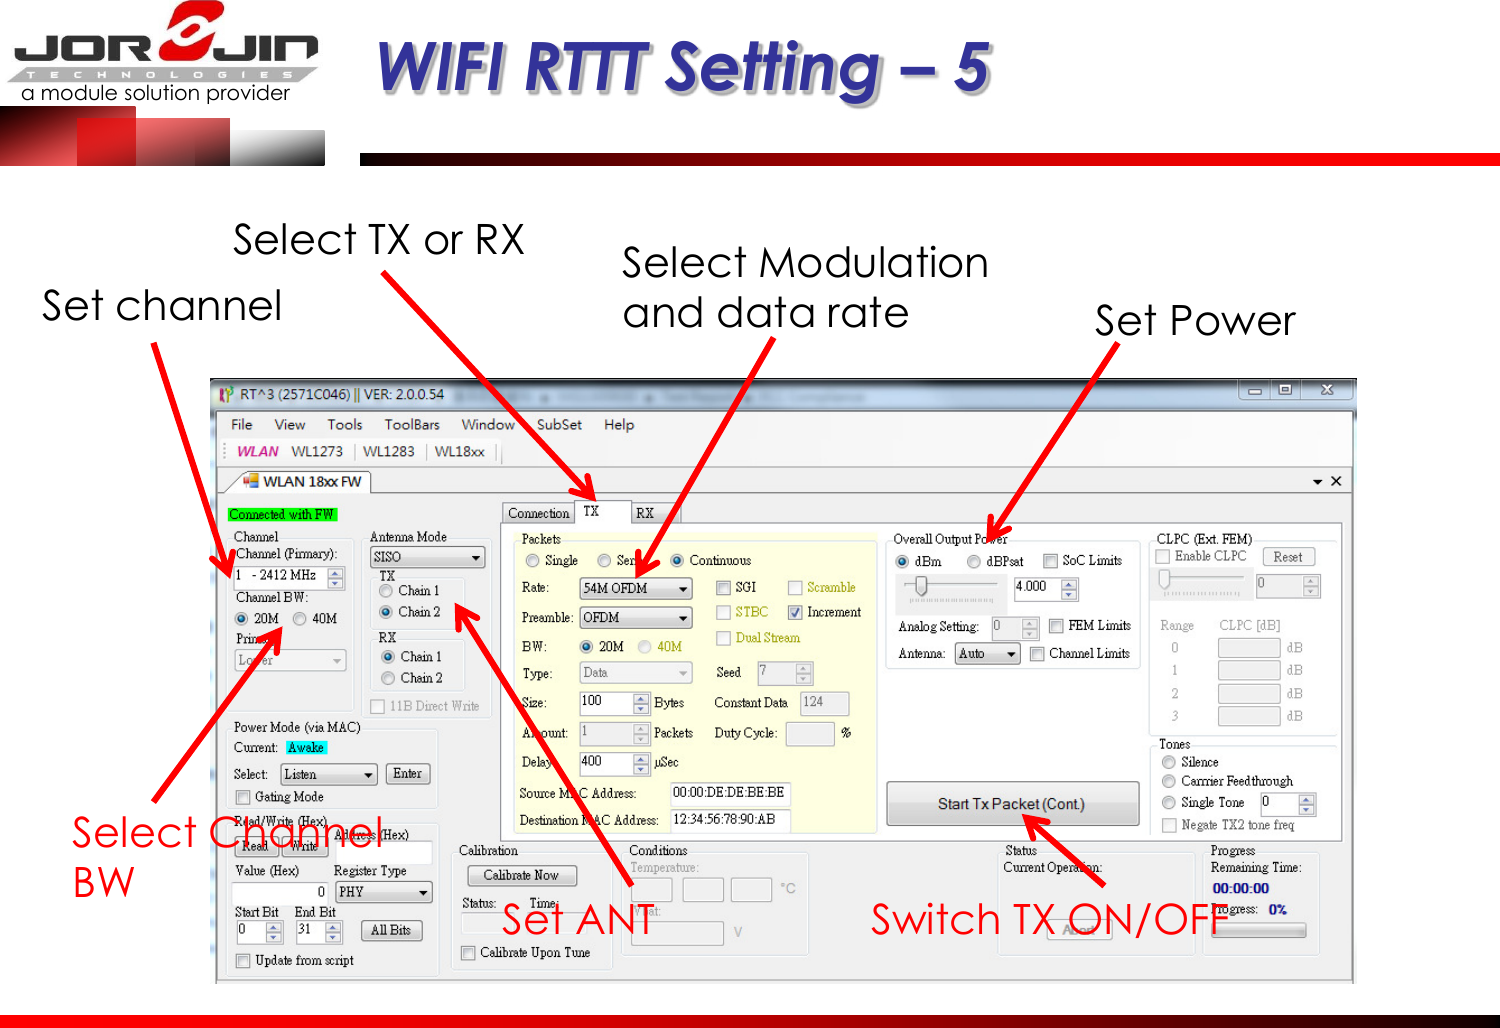 a module solution provider  WIFI RTTT Setting – 5 Select TX or RX Set channel Select Channel BW Set ANT Select Modulation and data rate  Set Power Switch TX ON/OFF 